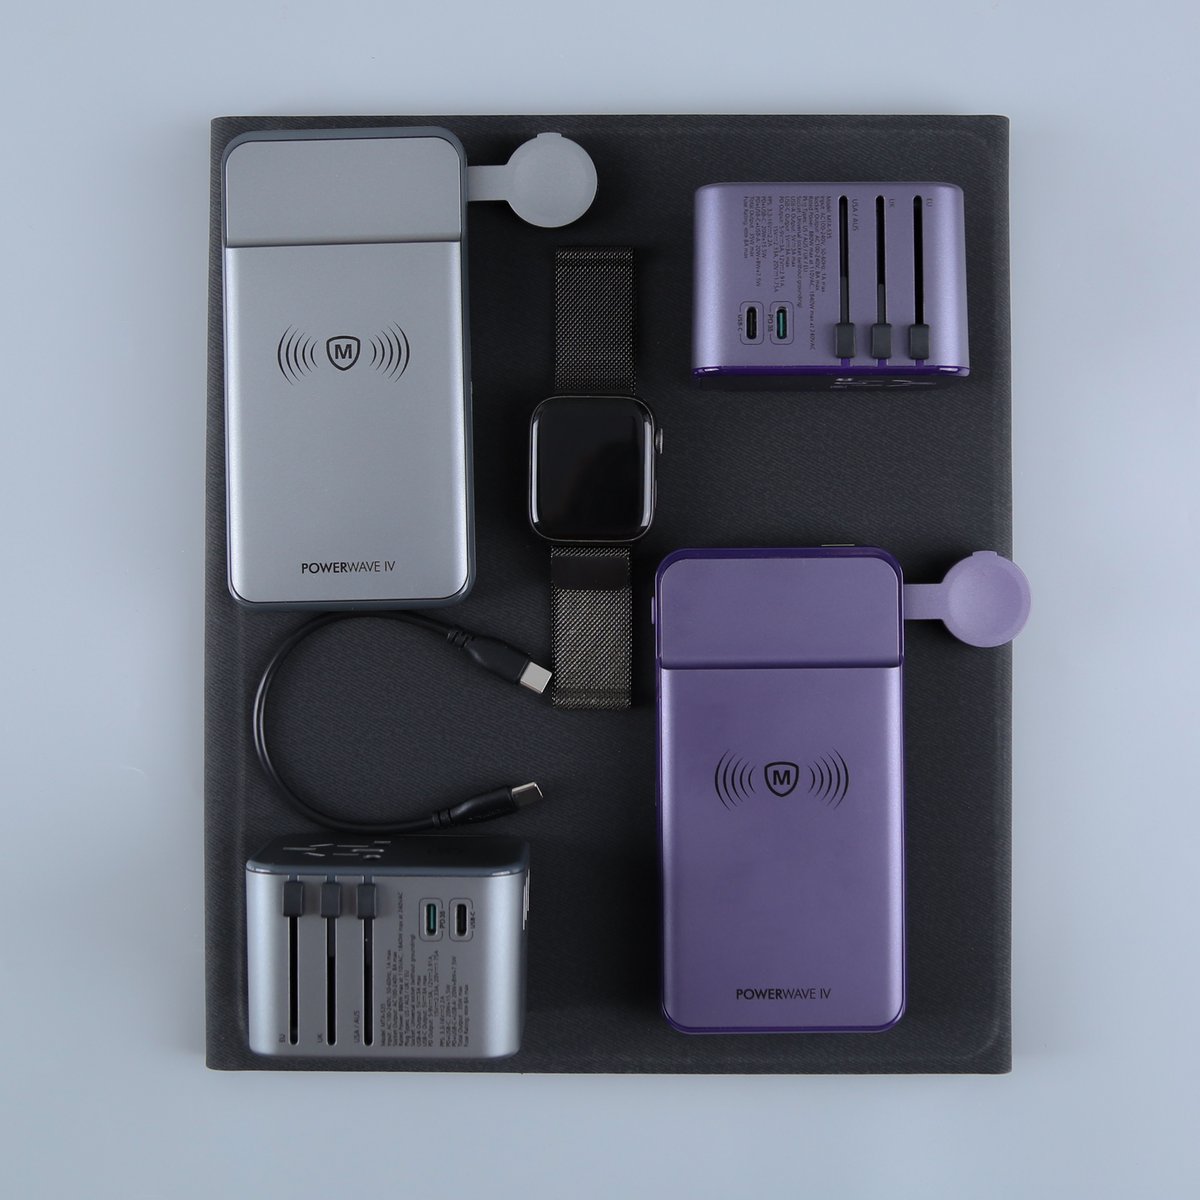 Get ready to travel the world with our multi-function power banks and universal travel adapter.😎😎😎

#Powerbank #traveladapter #phonecharger
#consumerelectronics #mobilephoneaccessories